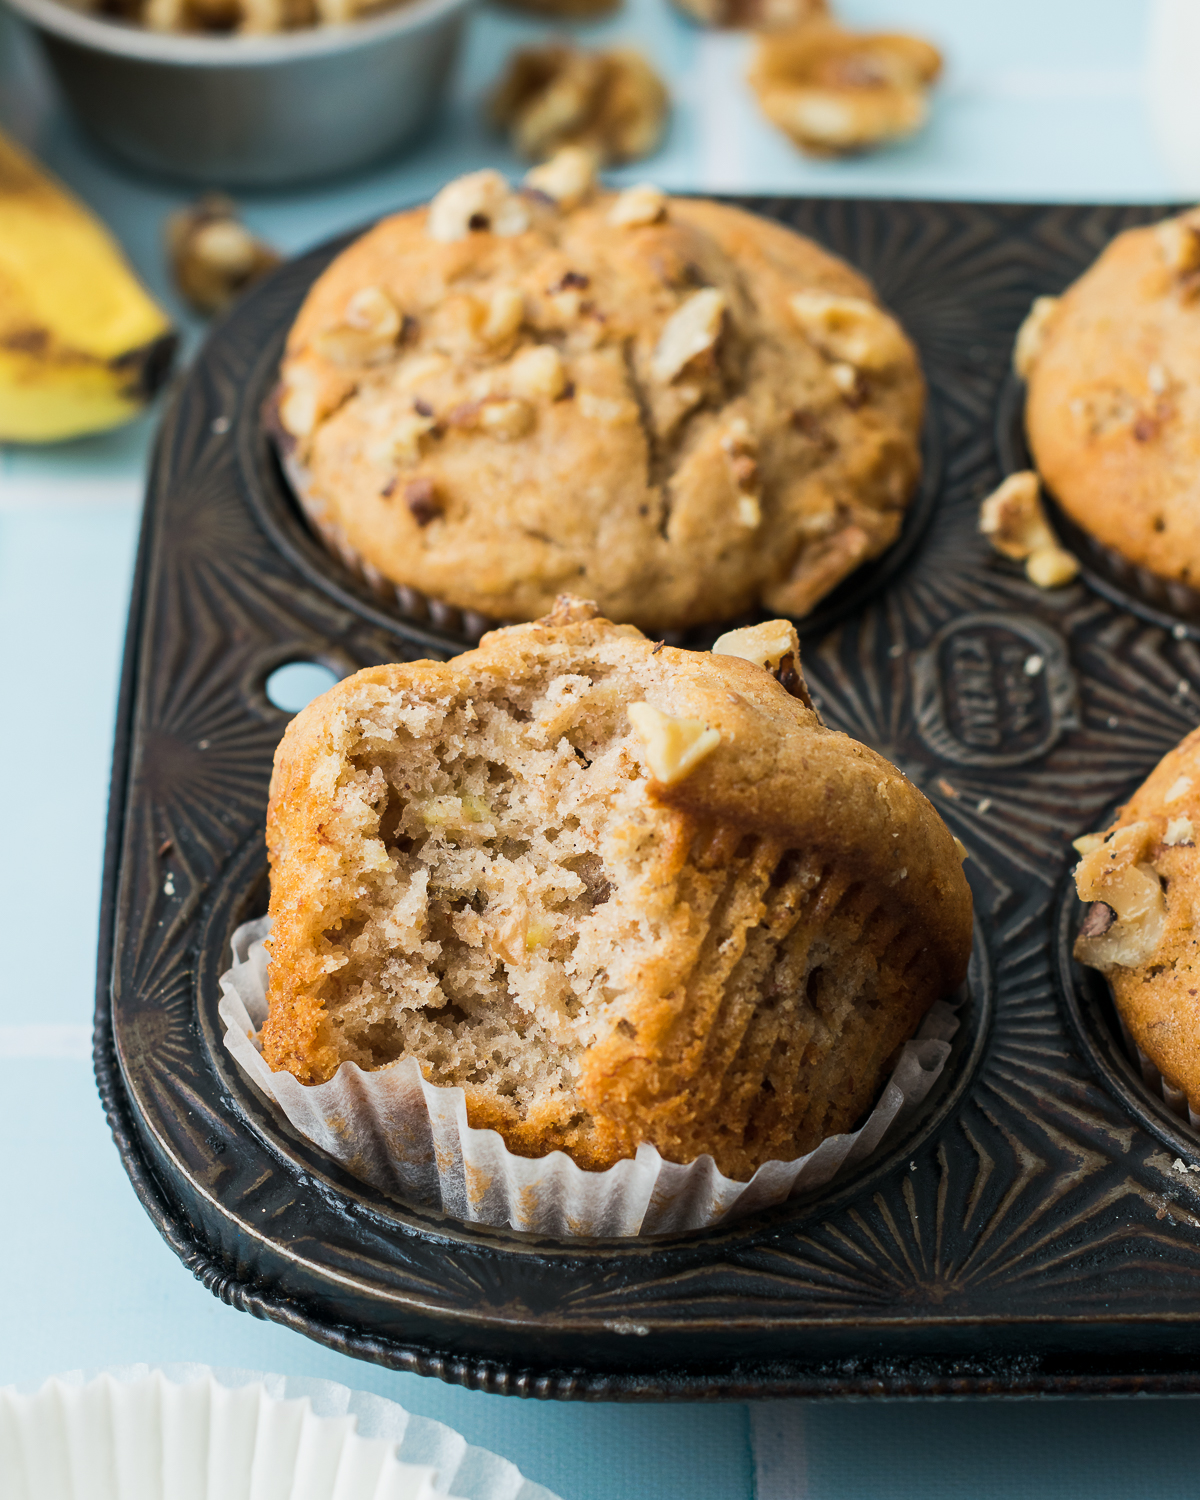 Freshly baked gluten free banana muffins sitting in a muffin tin on a blue tile table.